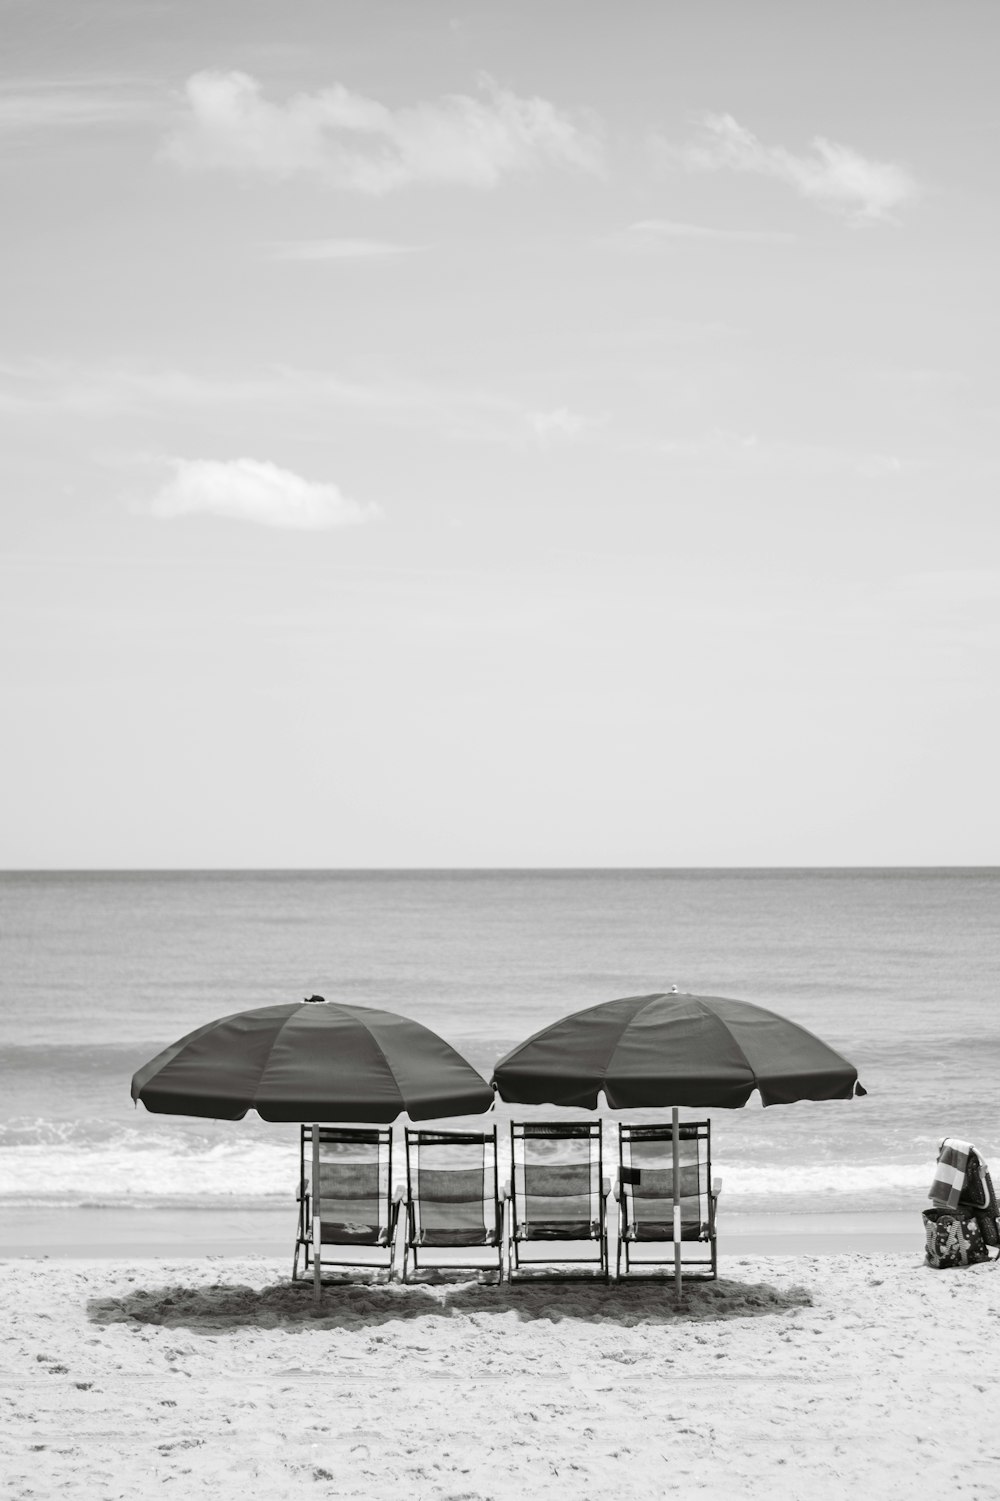 chairs and umbrellas on a beach